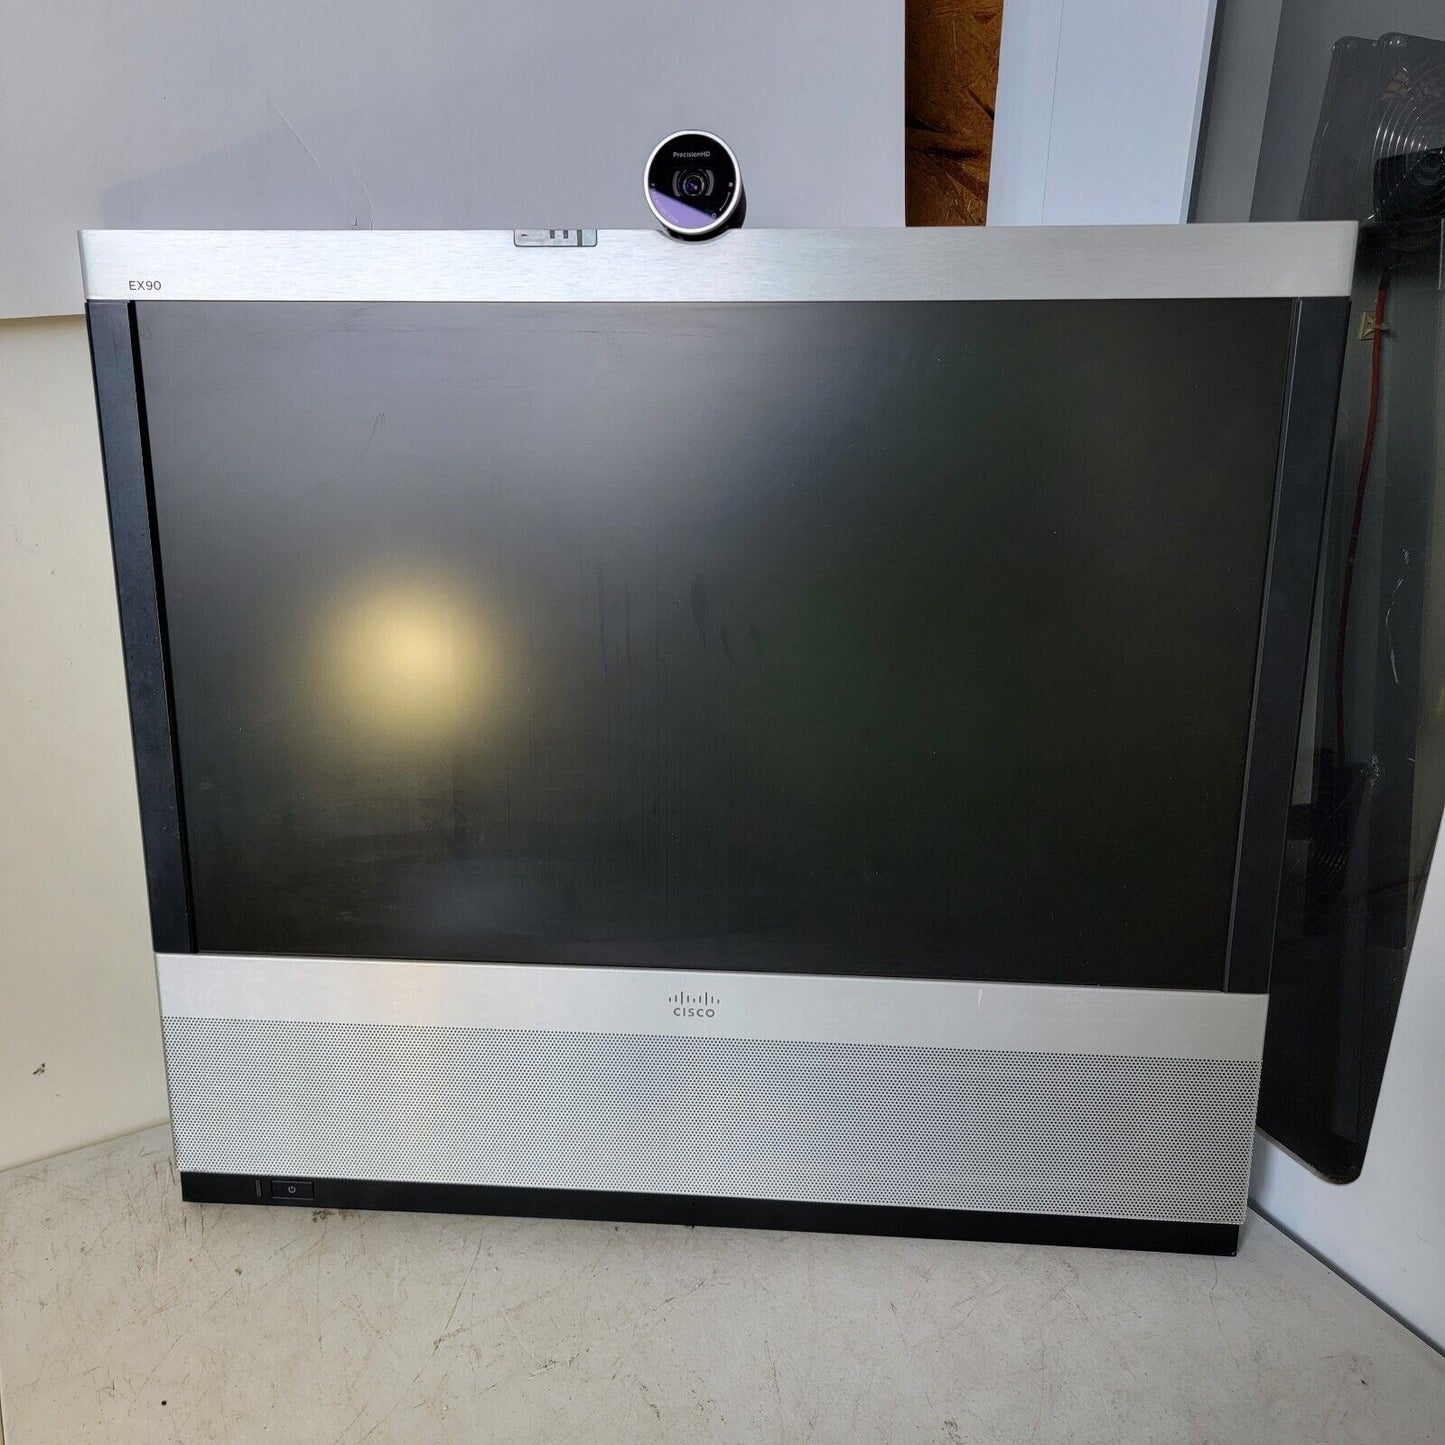 UNTESTED Cisco EX90 Video Conferencing Telepresence System CTS-EX90-K9